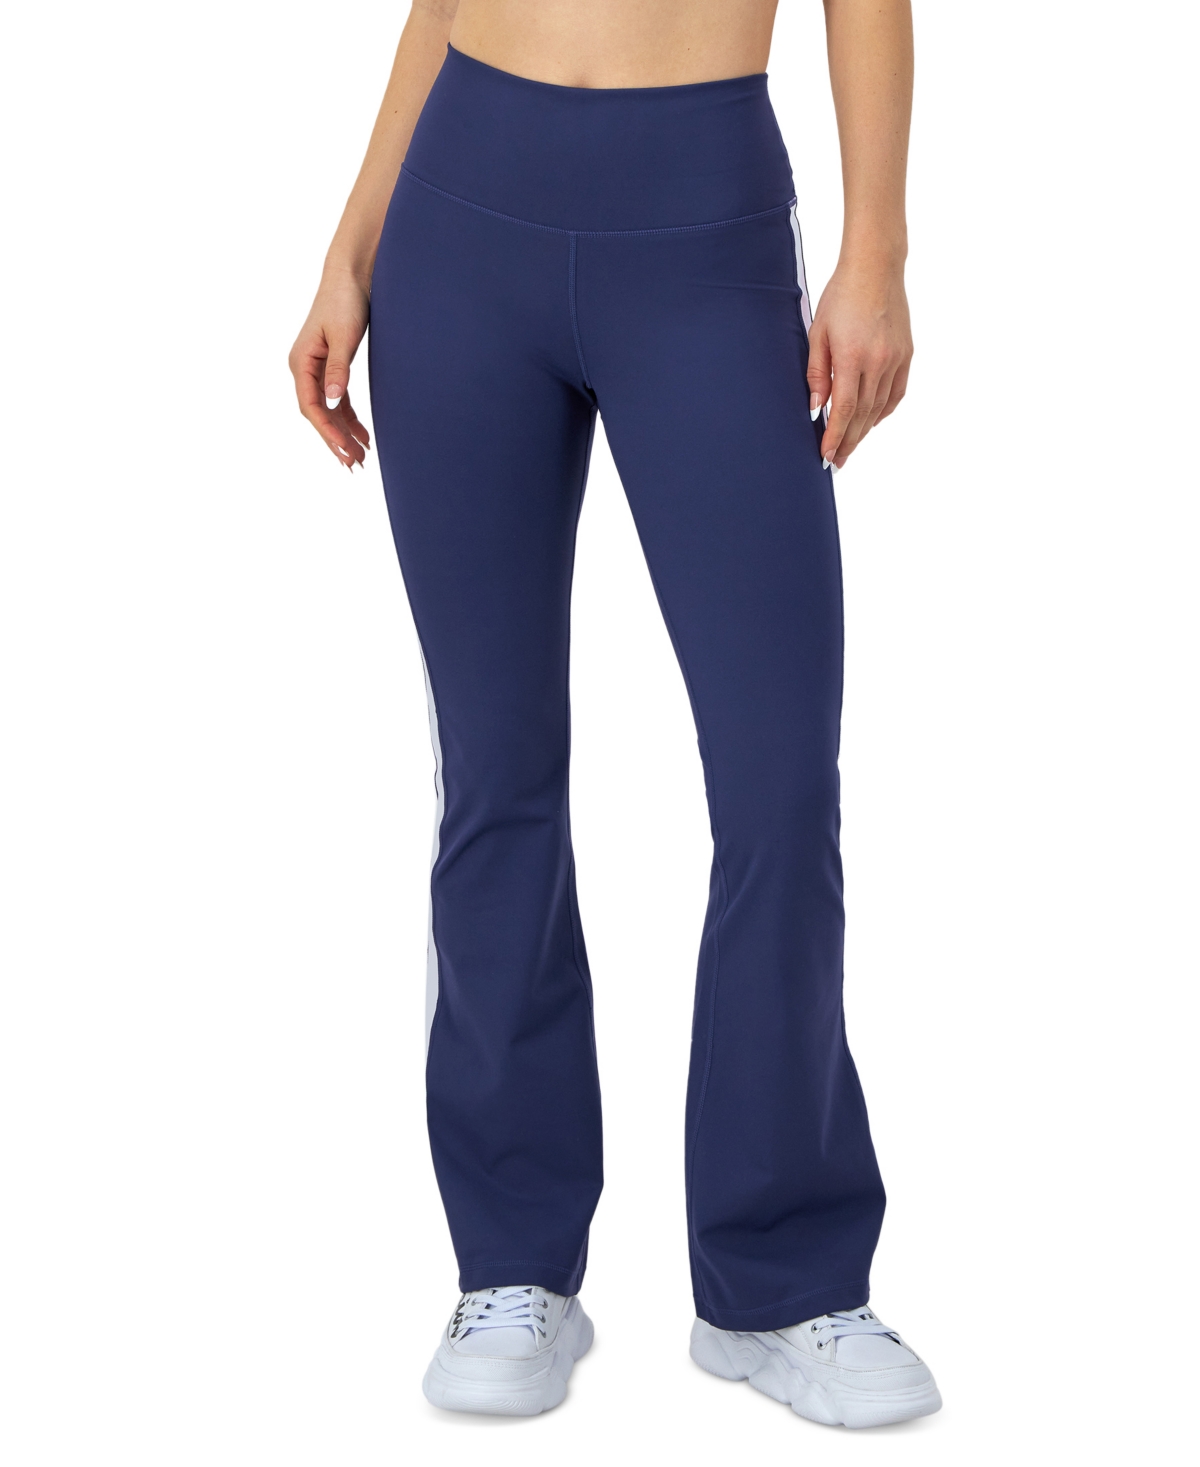 Women's Soft Touch Track Flare Pants - Blown Glass Blue/white